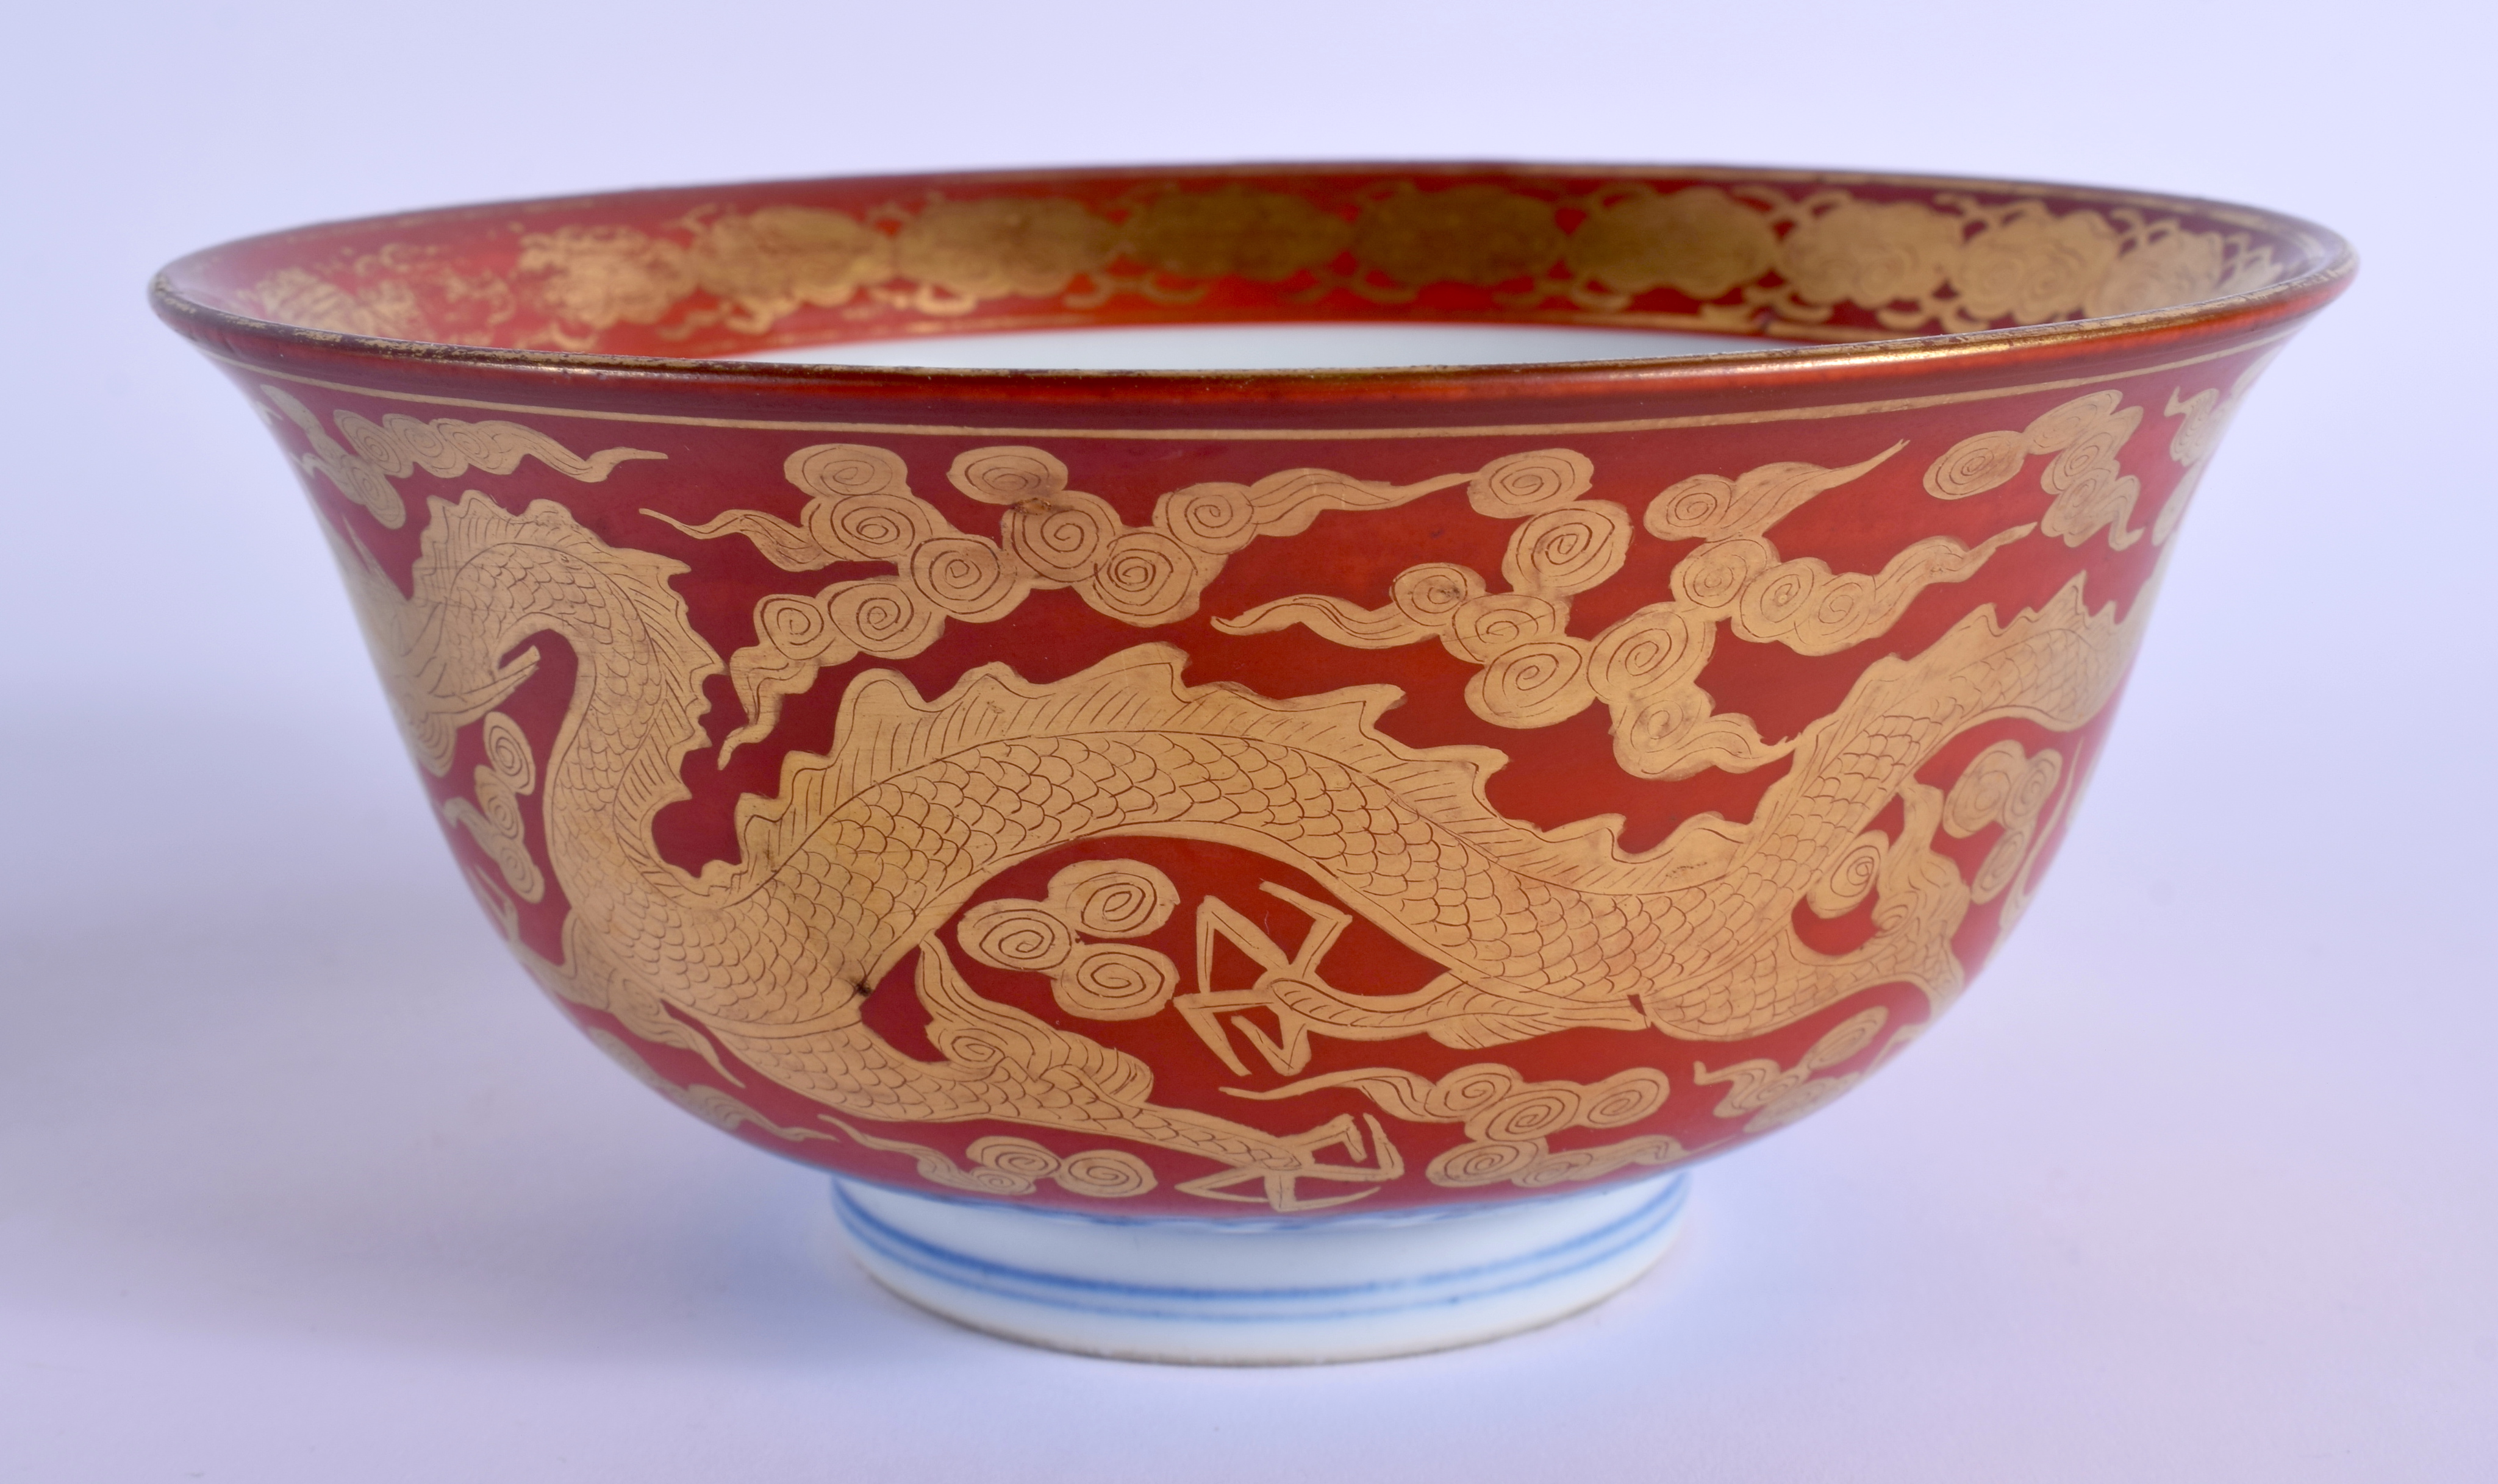 A 19TH CENTURY JAPANESE MEIJI PERIOD KUTANI PORCELAIN BOWL painted upon a coral ground with dragons. - Image 3 of 5